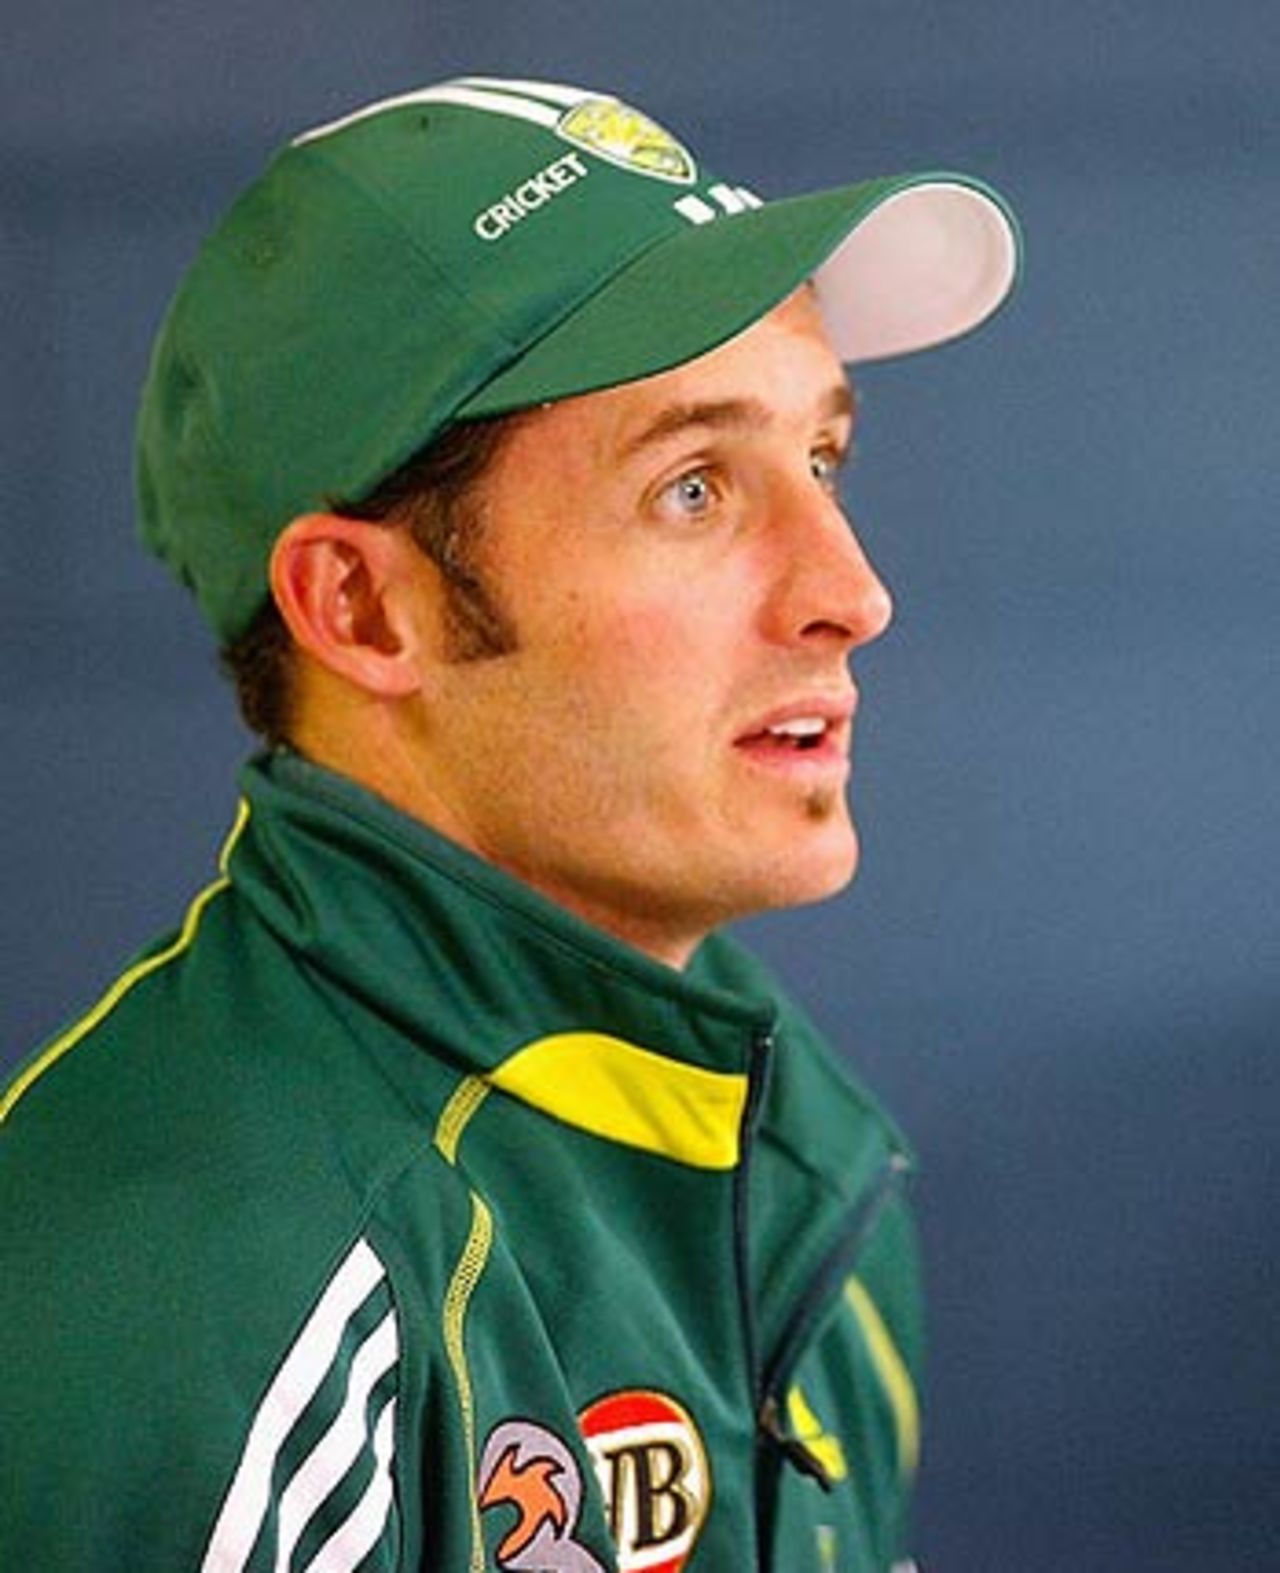 Michael Hussey speaks to the press ahead of the inaugral Twenty20 
international between Australia and South Africa, Brisbane, January 8, 2005

